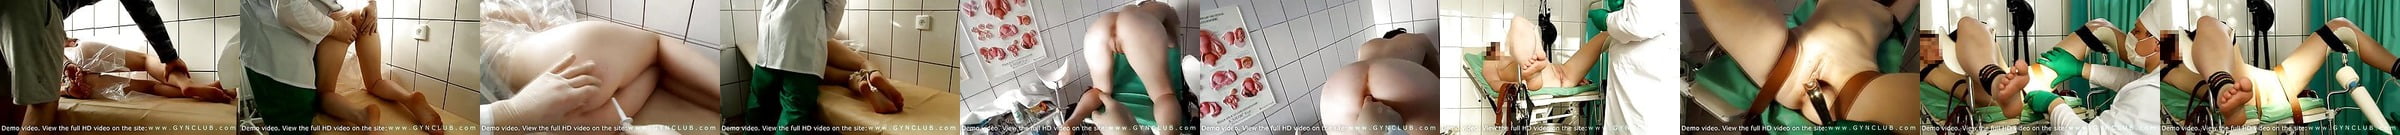 Featured Hospital Porn Videos Xhamster